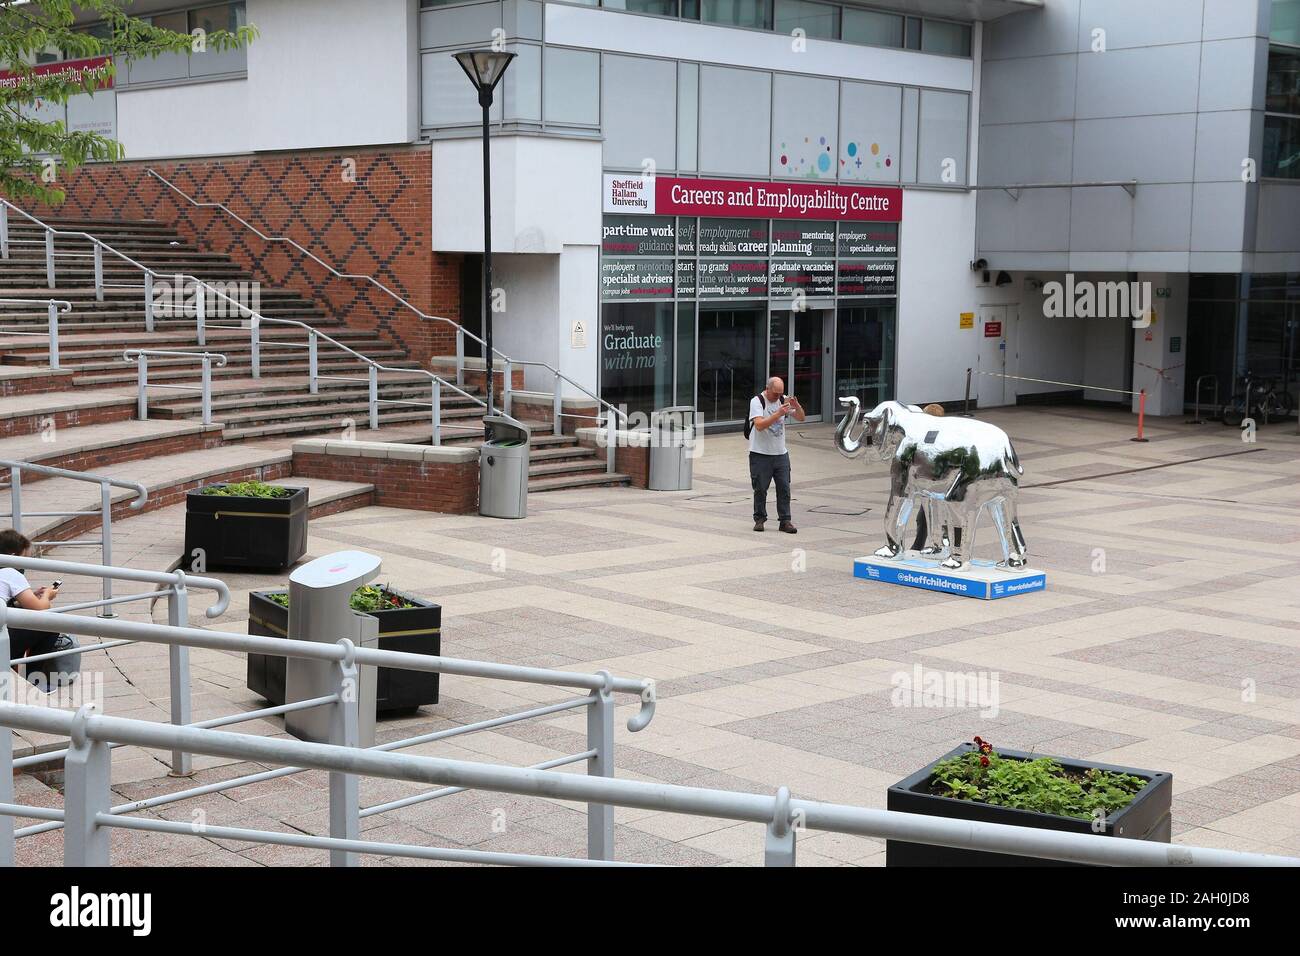 SHEFFIELD, UK - JULY 10, 2016: People visit Sheffield Hallam University in the UK. The public university is 6th largest in the UK with 31,530 students Stock Photo